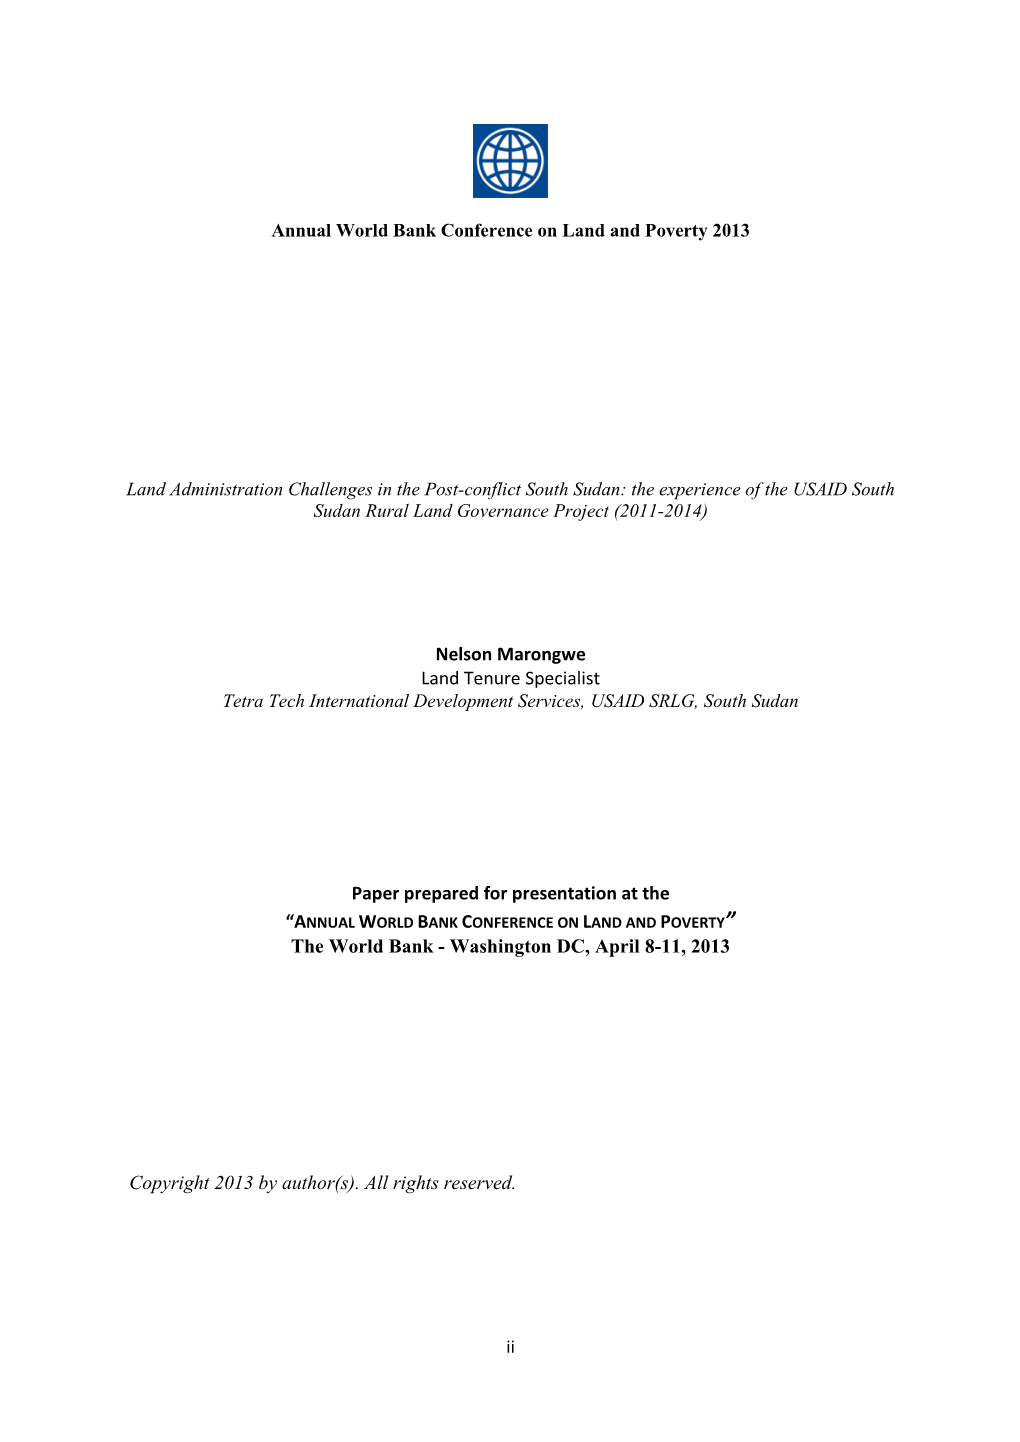 Land Administration Challenges in the Post-Conflict South Sudan: the Experience of the USAID South Sudan Rural Land Governance Project (2011-2014)